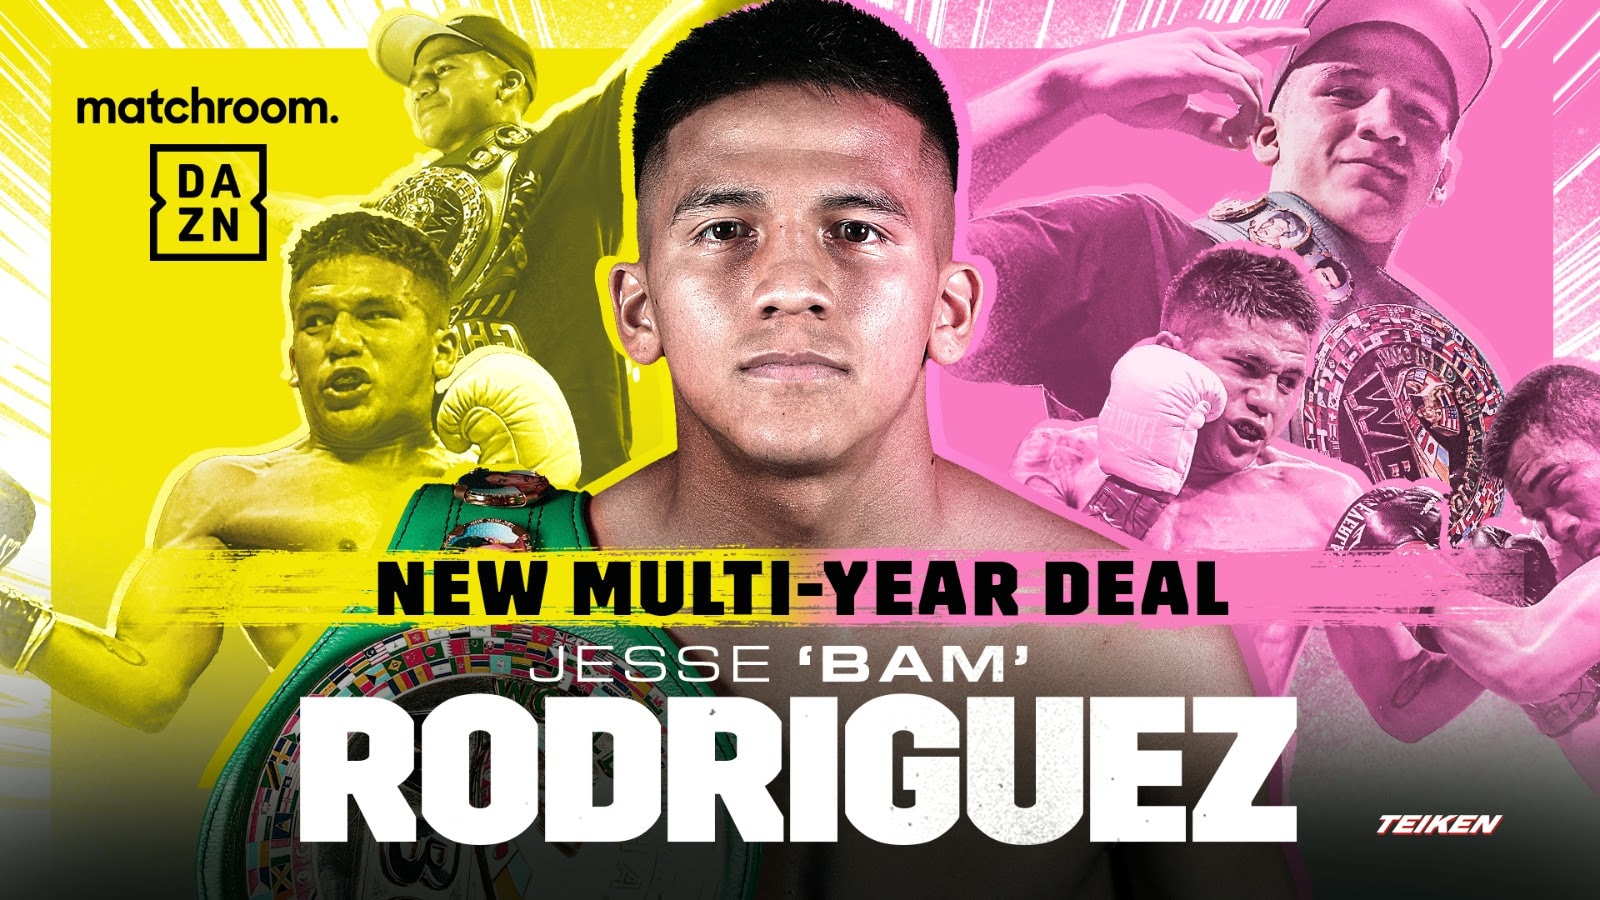 Image: Jesse Rodriguez inks multi-year deal with Eddie Hearn's Matchroom